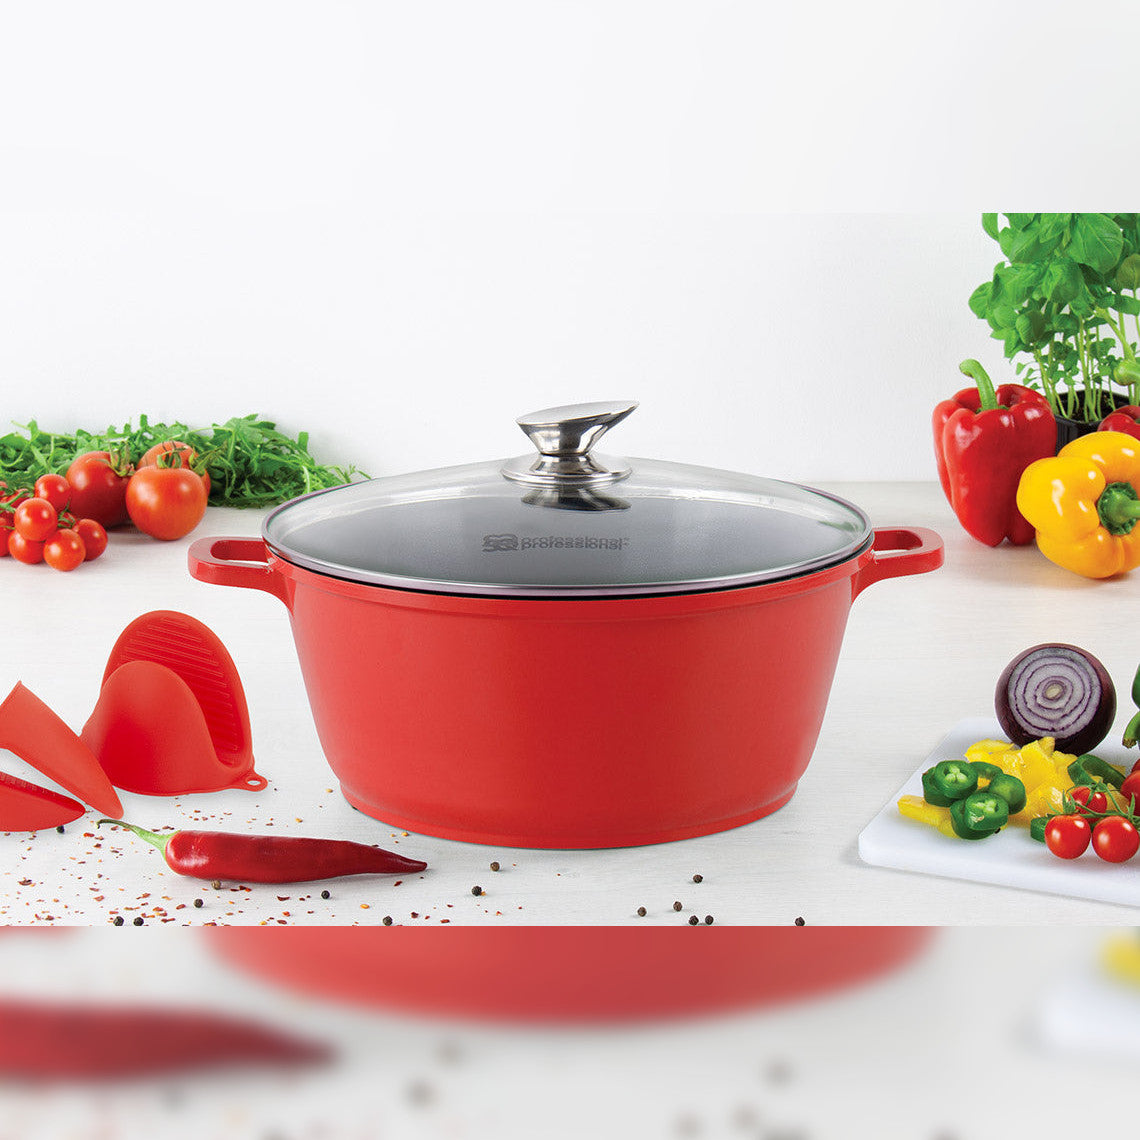 Die Cast Stockpot - Induction Base - NEA - Red- 28cm